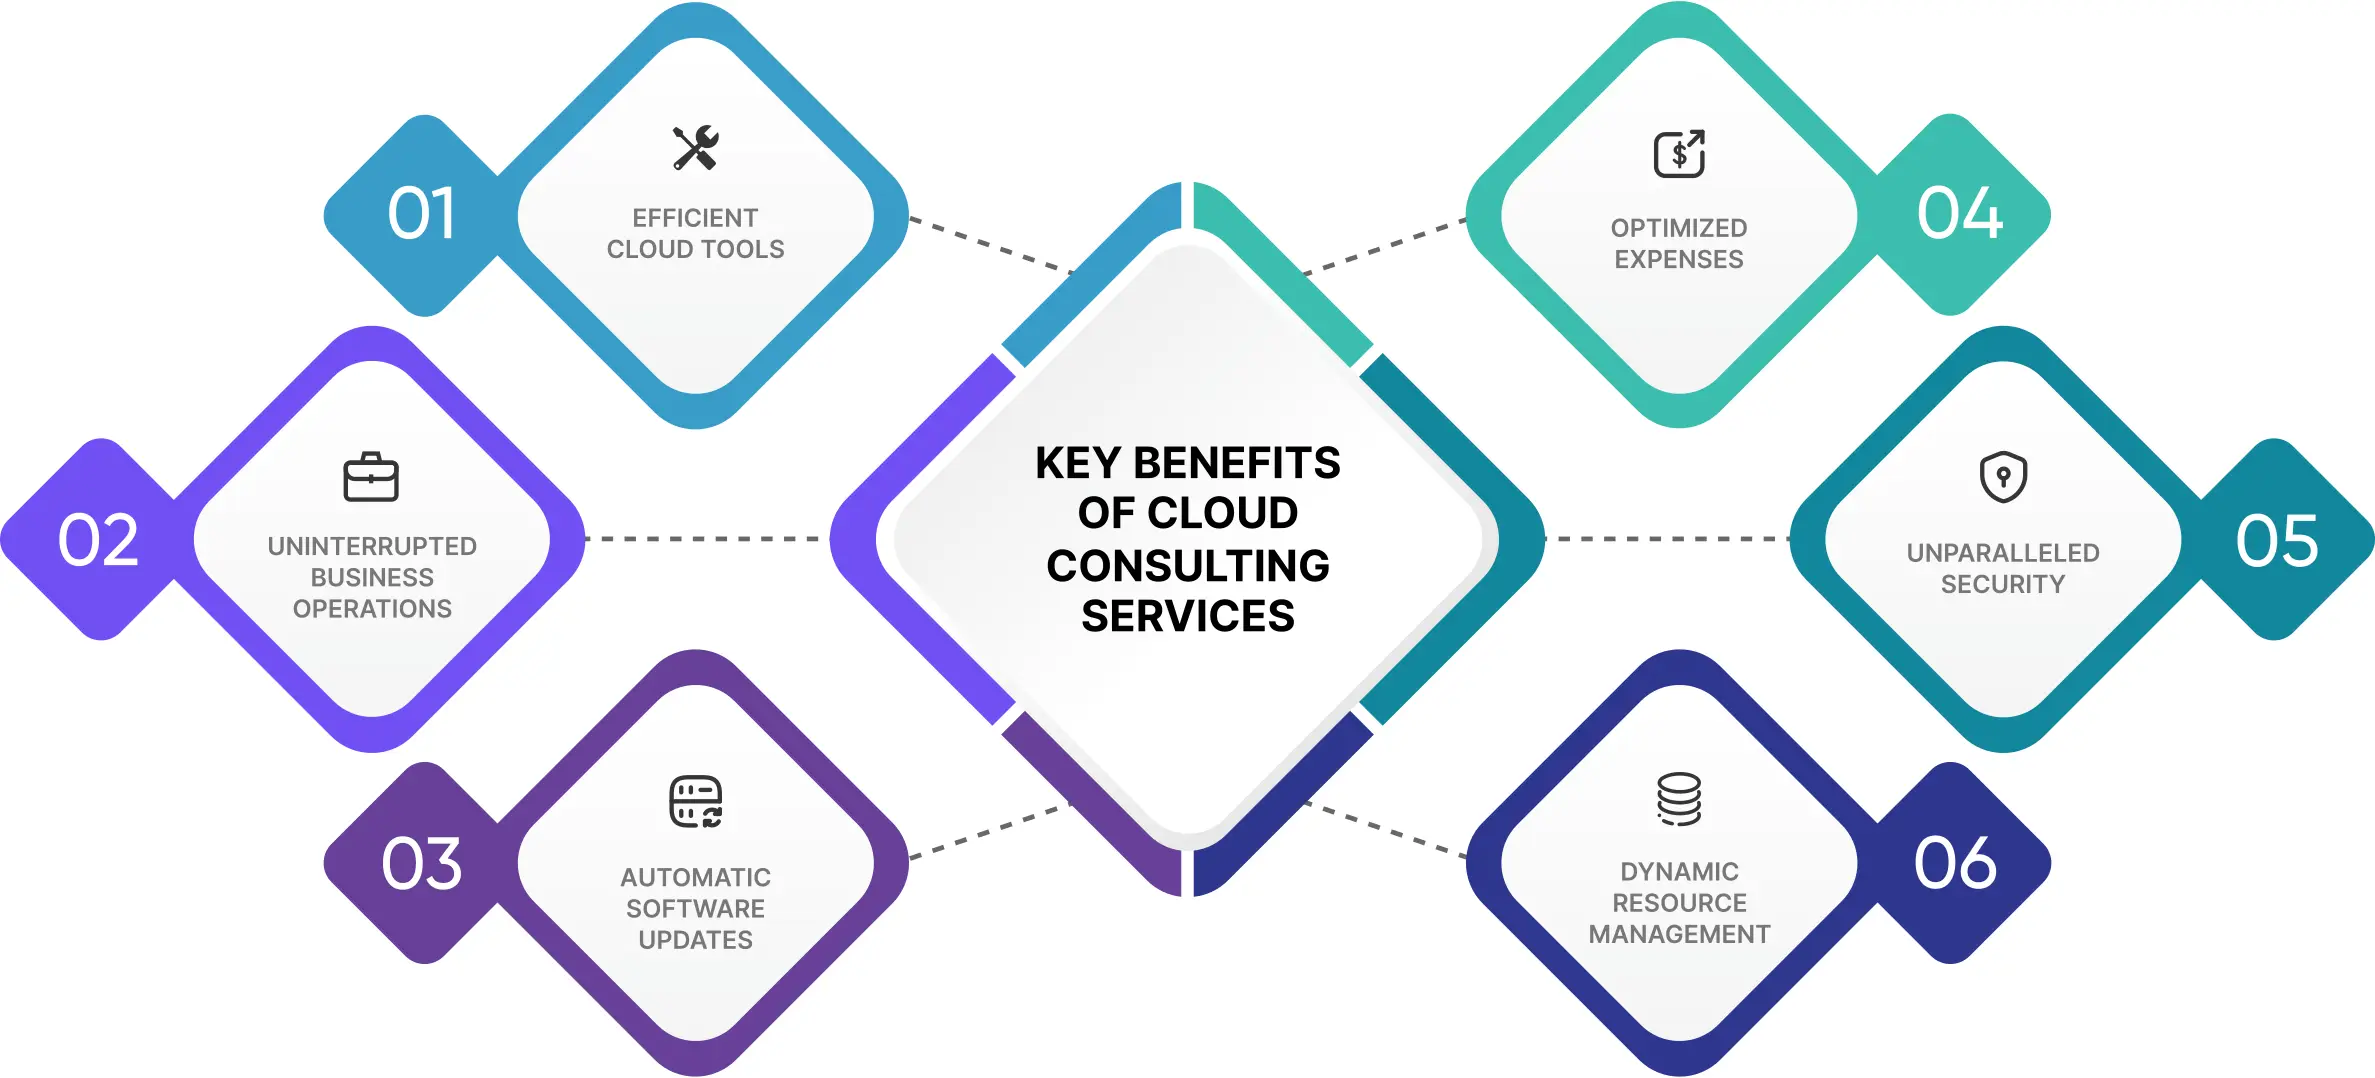 Benefits of Cloud Consulting Services